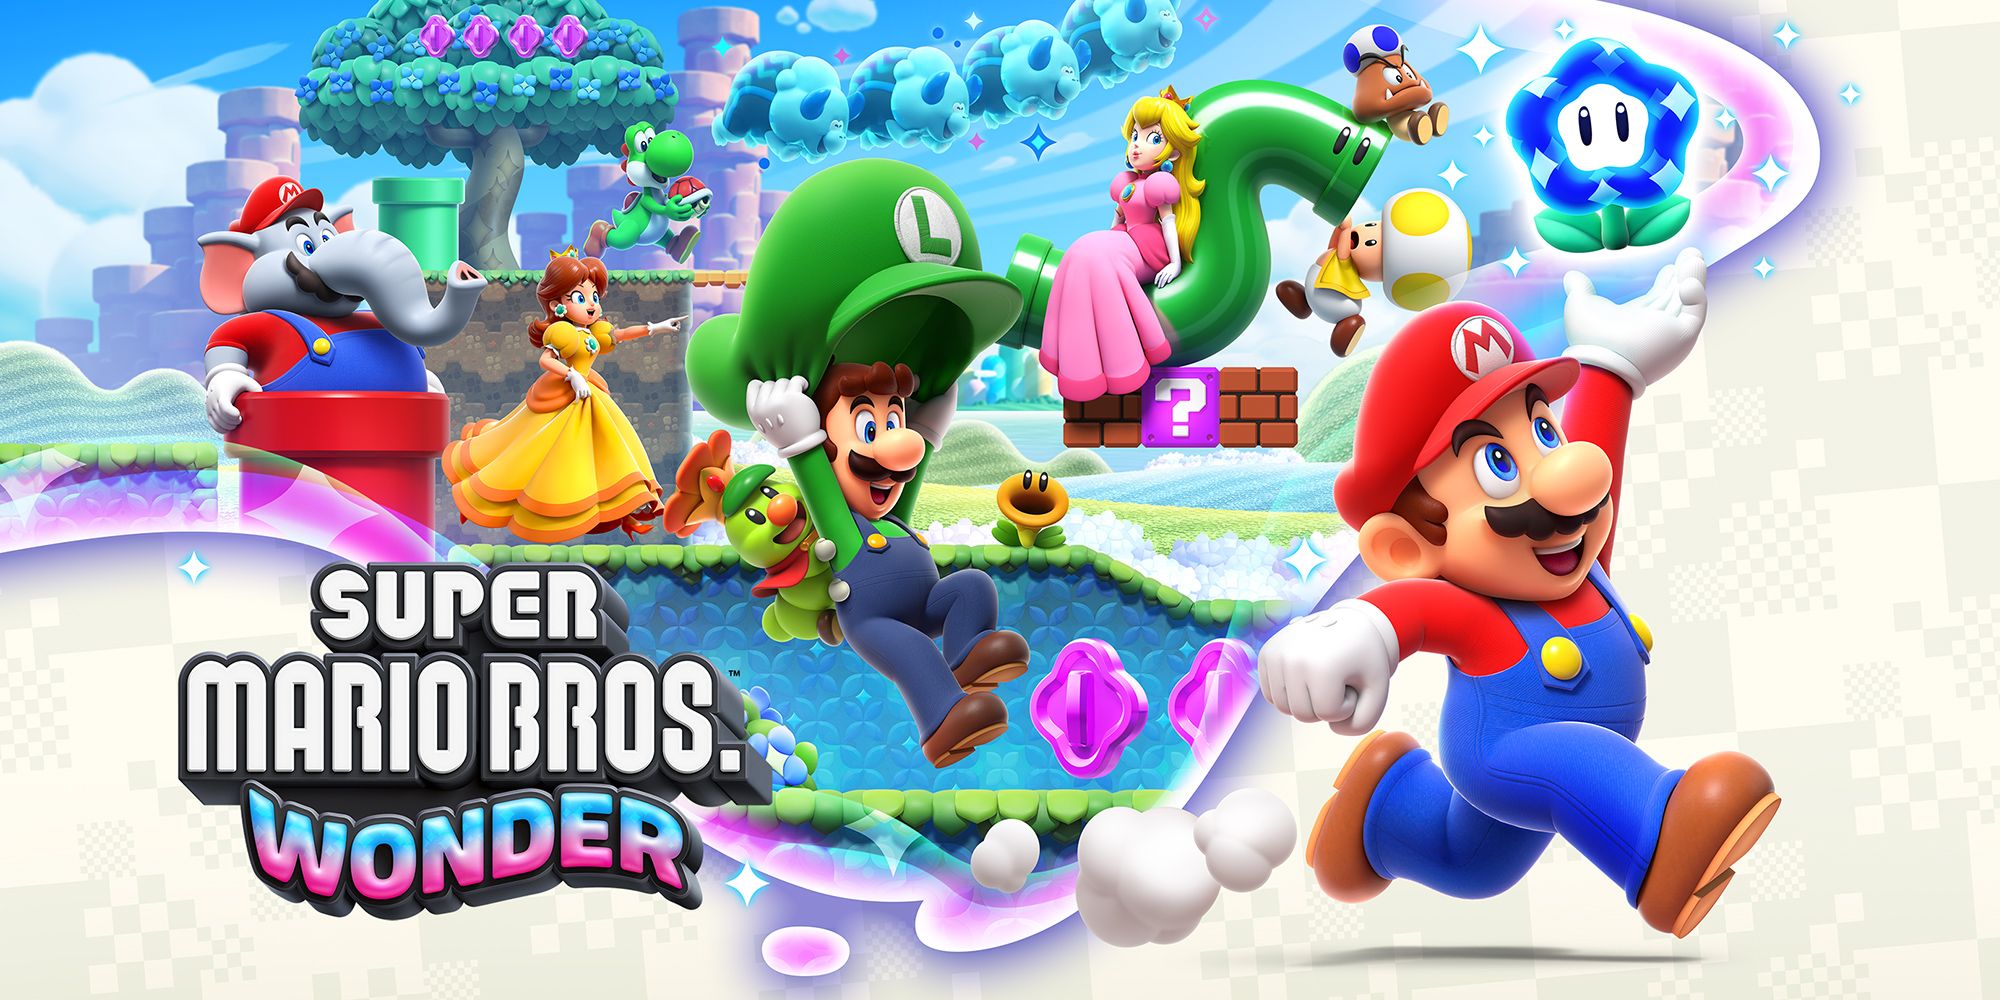 Super Mario Bros. Wonder cover art showing the playable cast running to the right